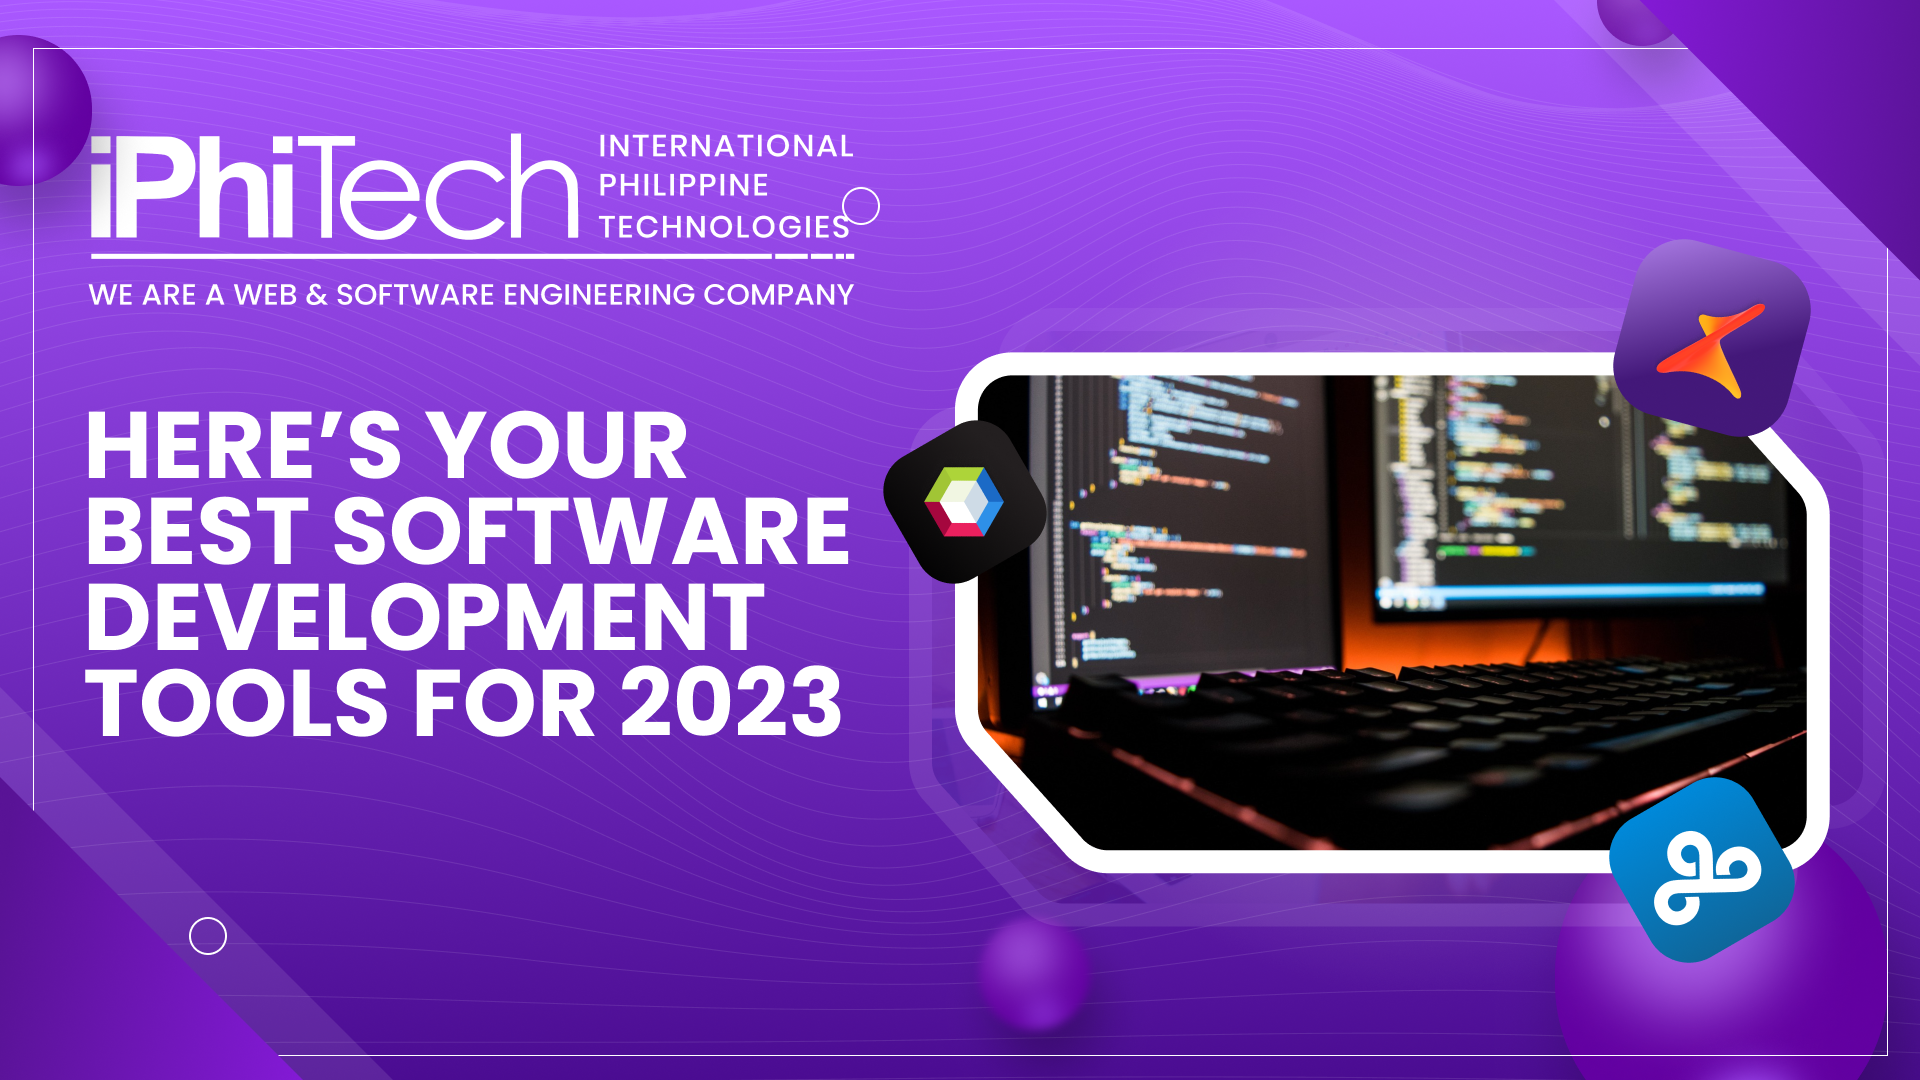 Heres-Your-Best-Software-Development-Tools-for-2023